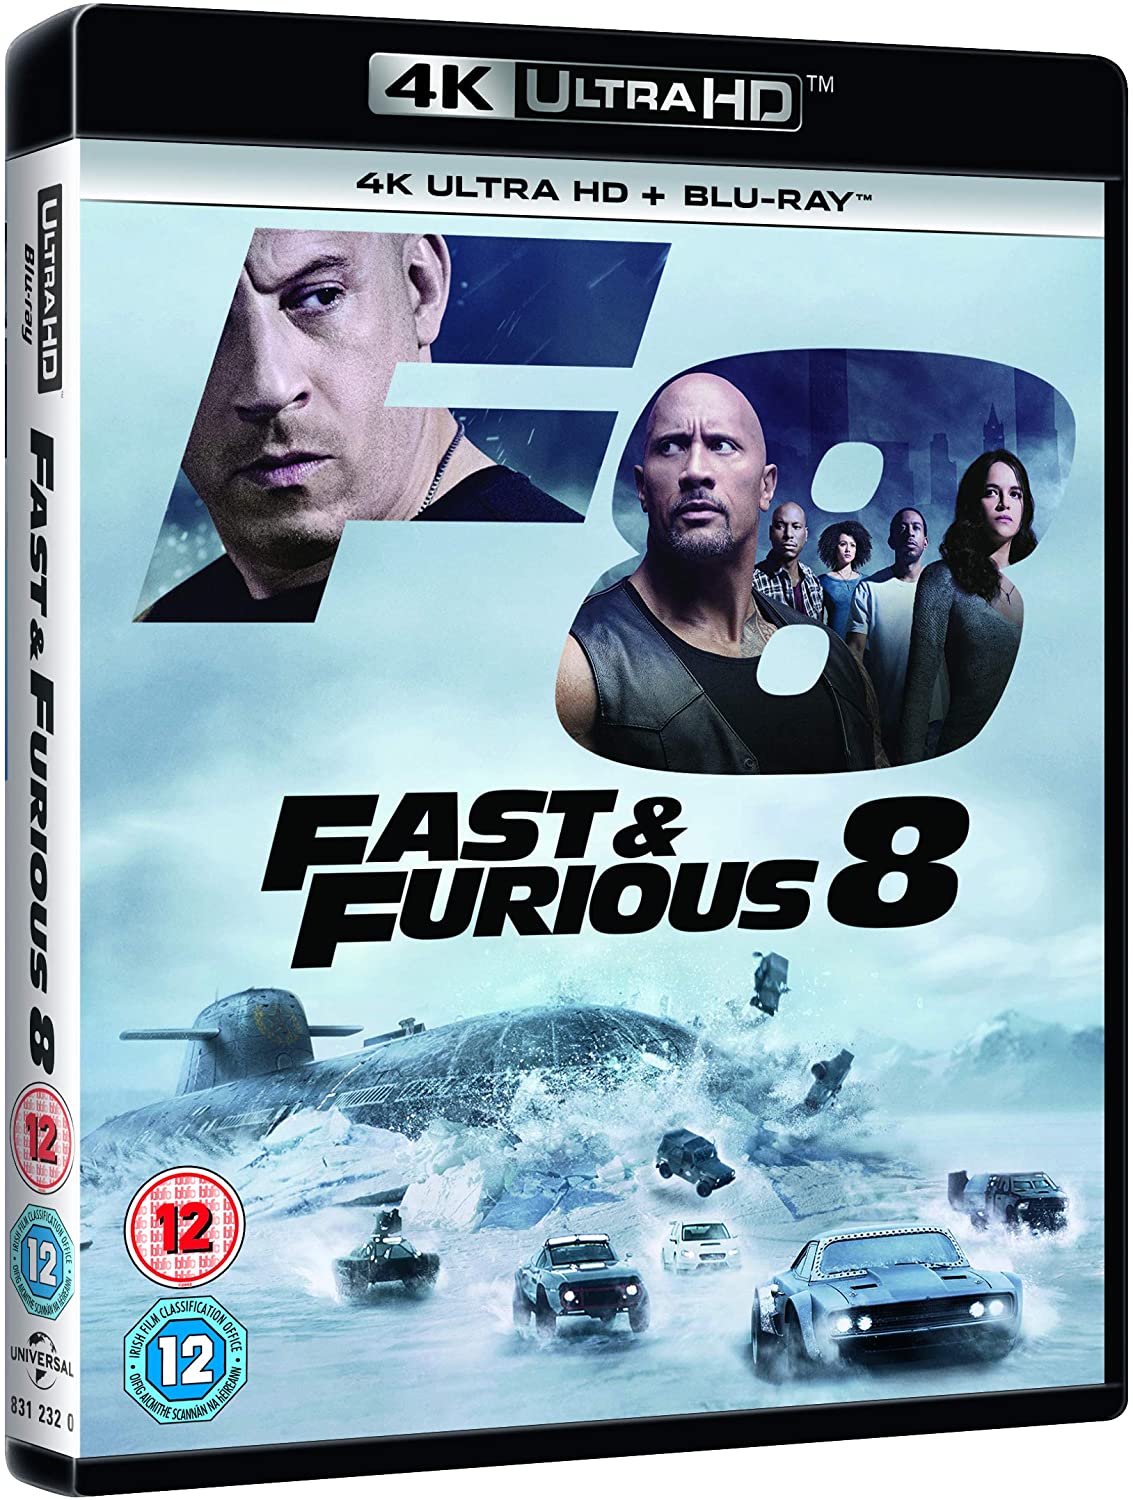 The Fast And Furious 8 [2017] (4K Ultra HD + Blu-ray)